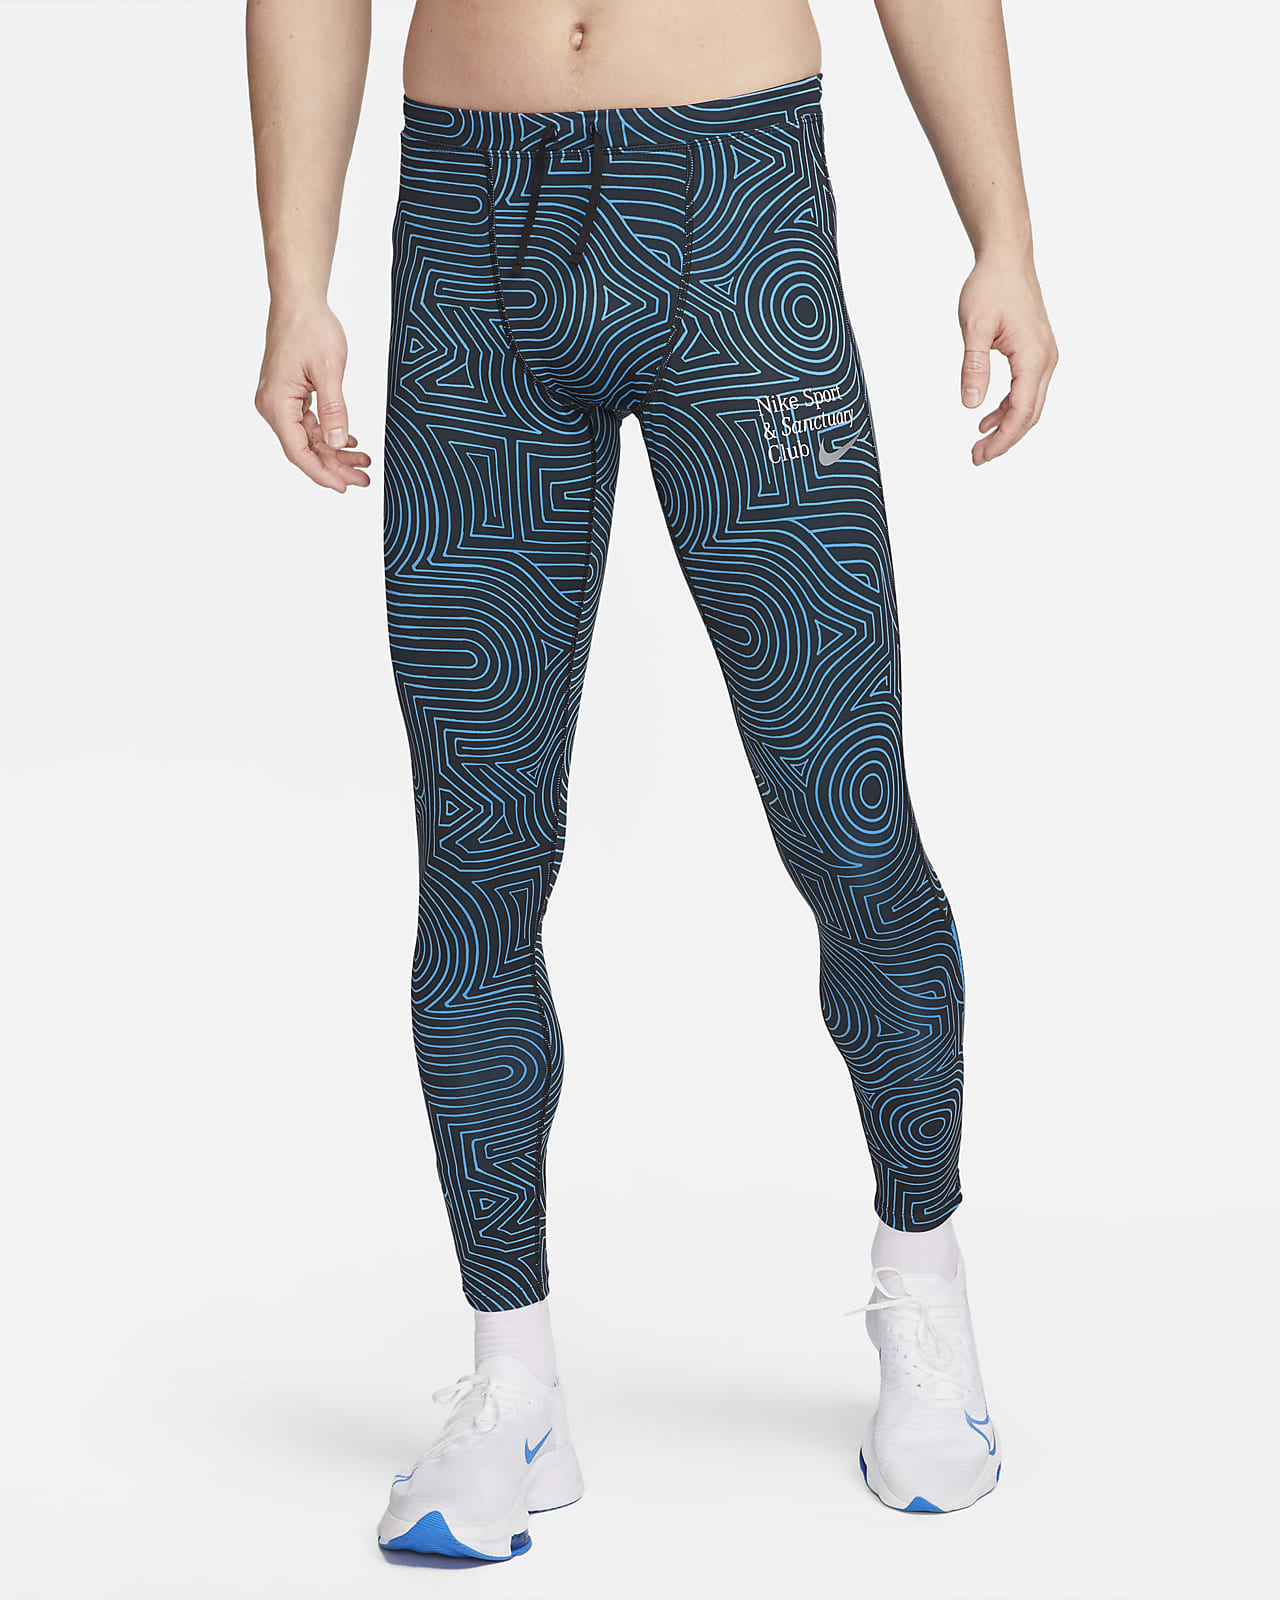 Nike 3/4 running tights FAST with mesh